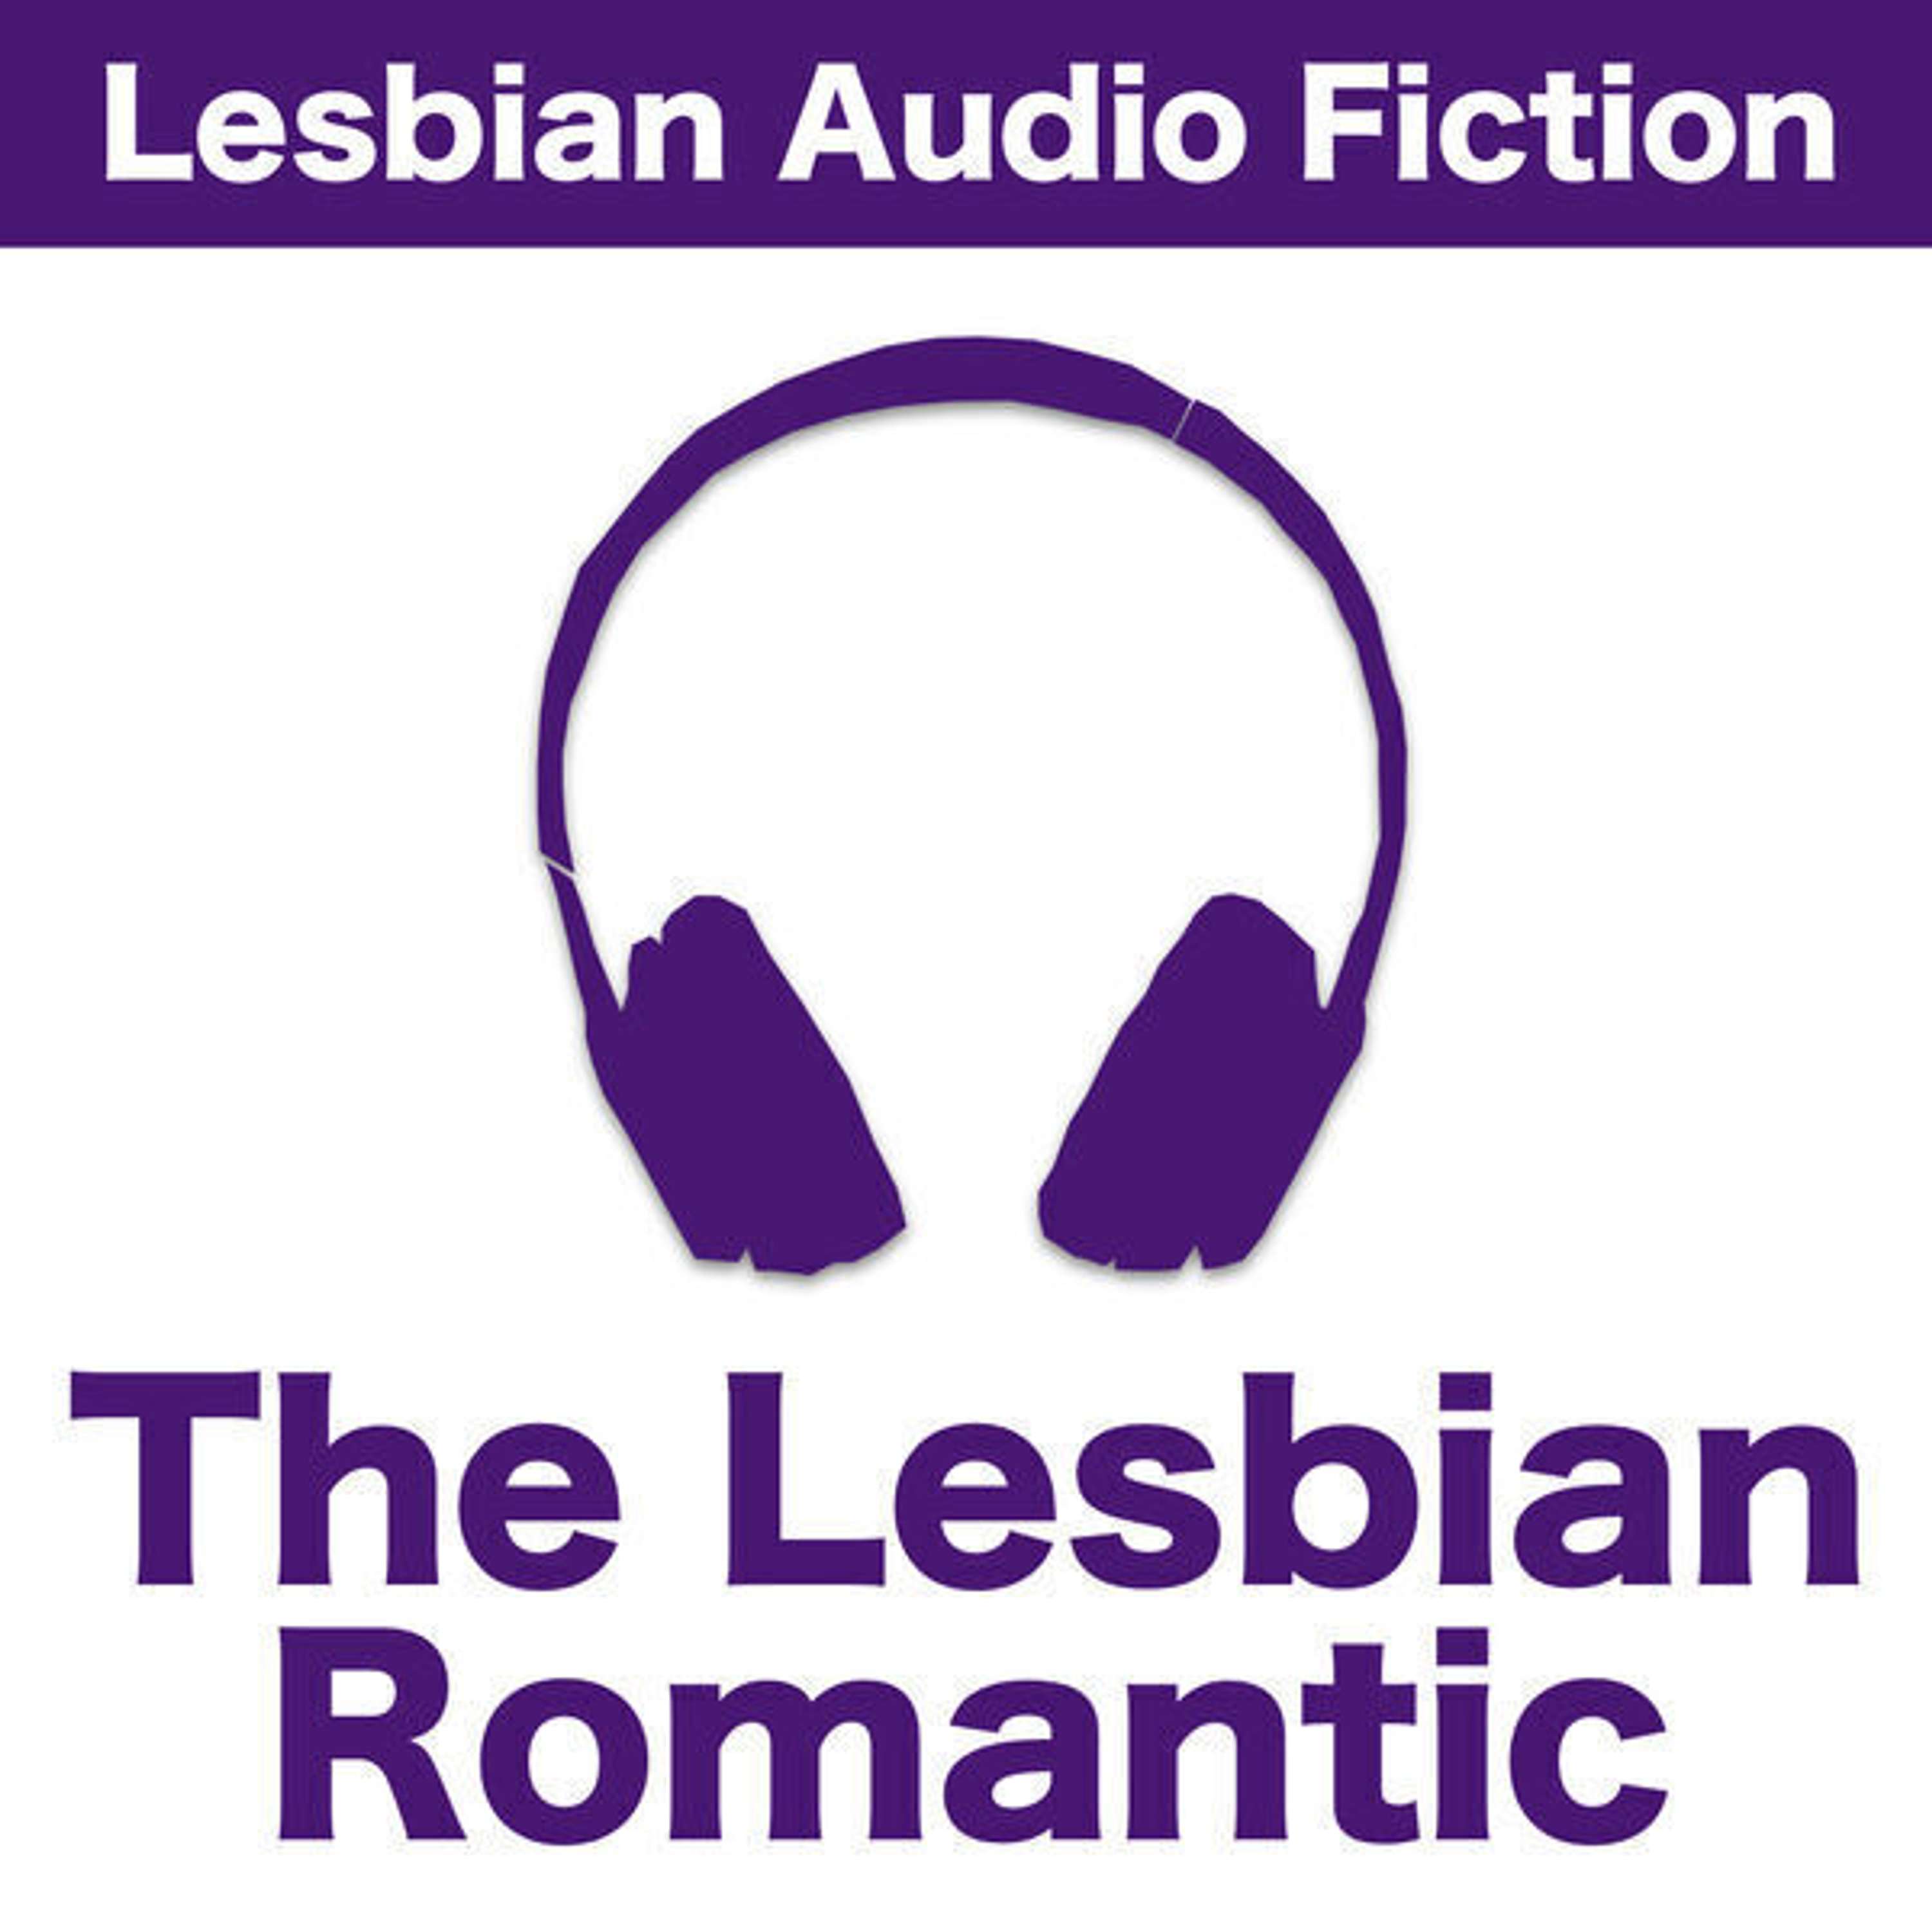 Part 16 of The Diva Story - a lesbian fiction audio drama (#68)